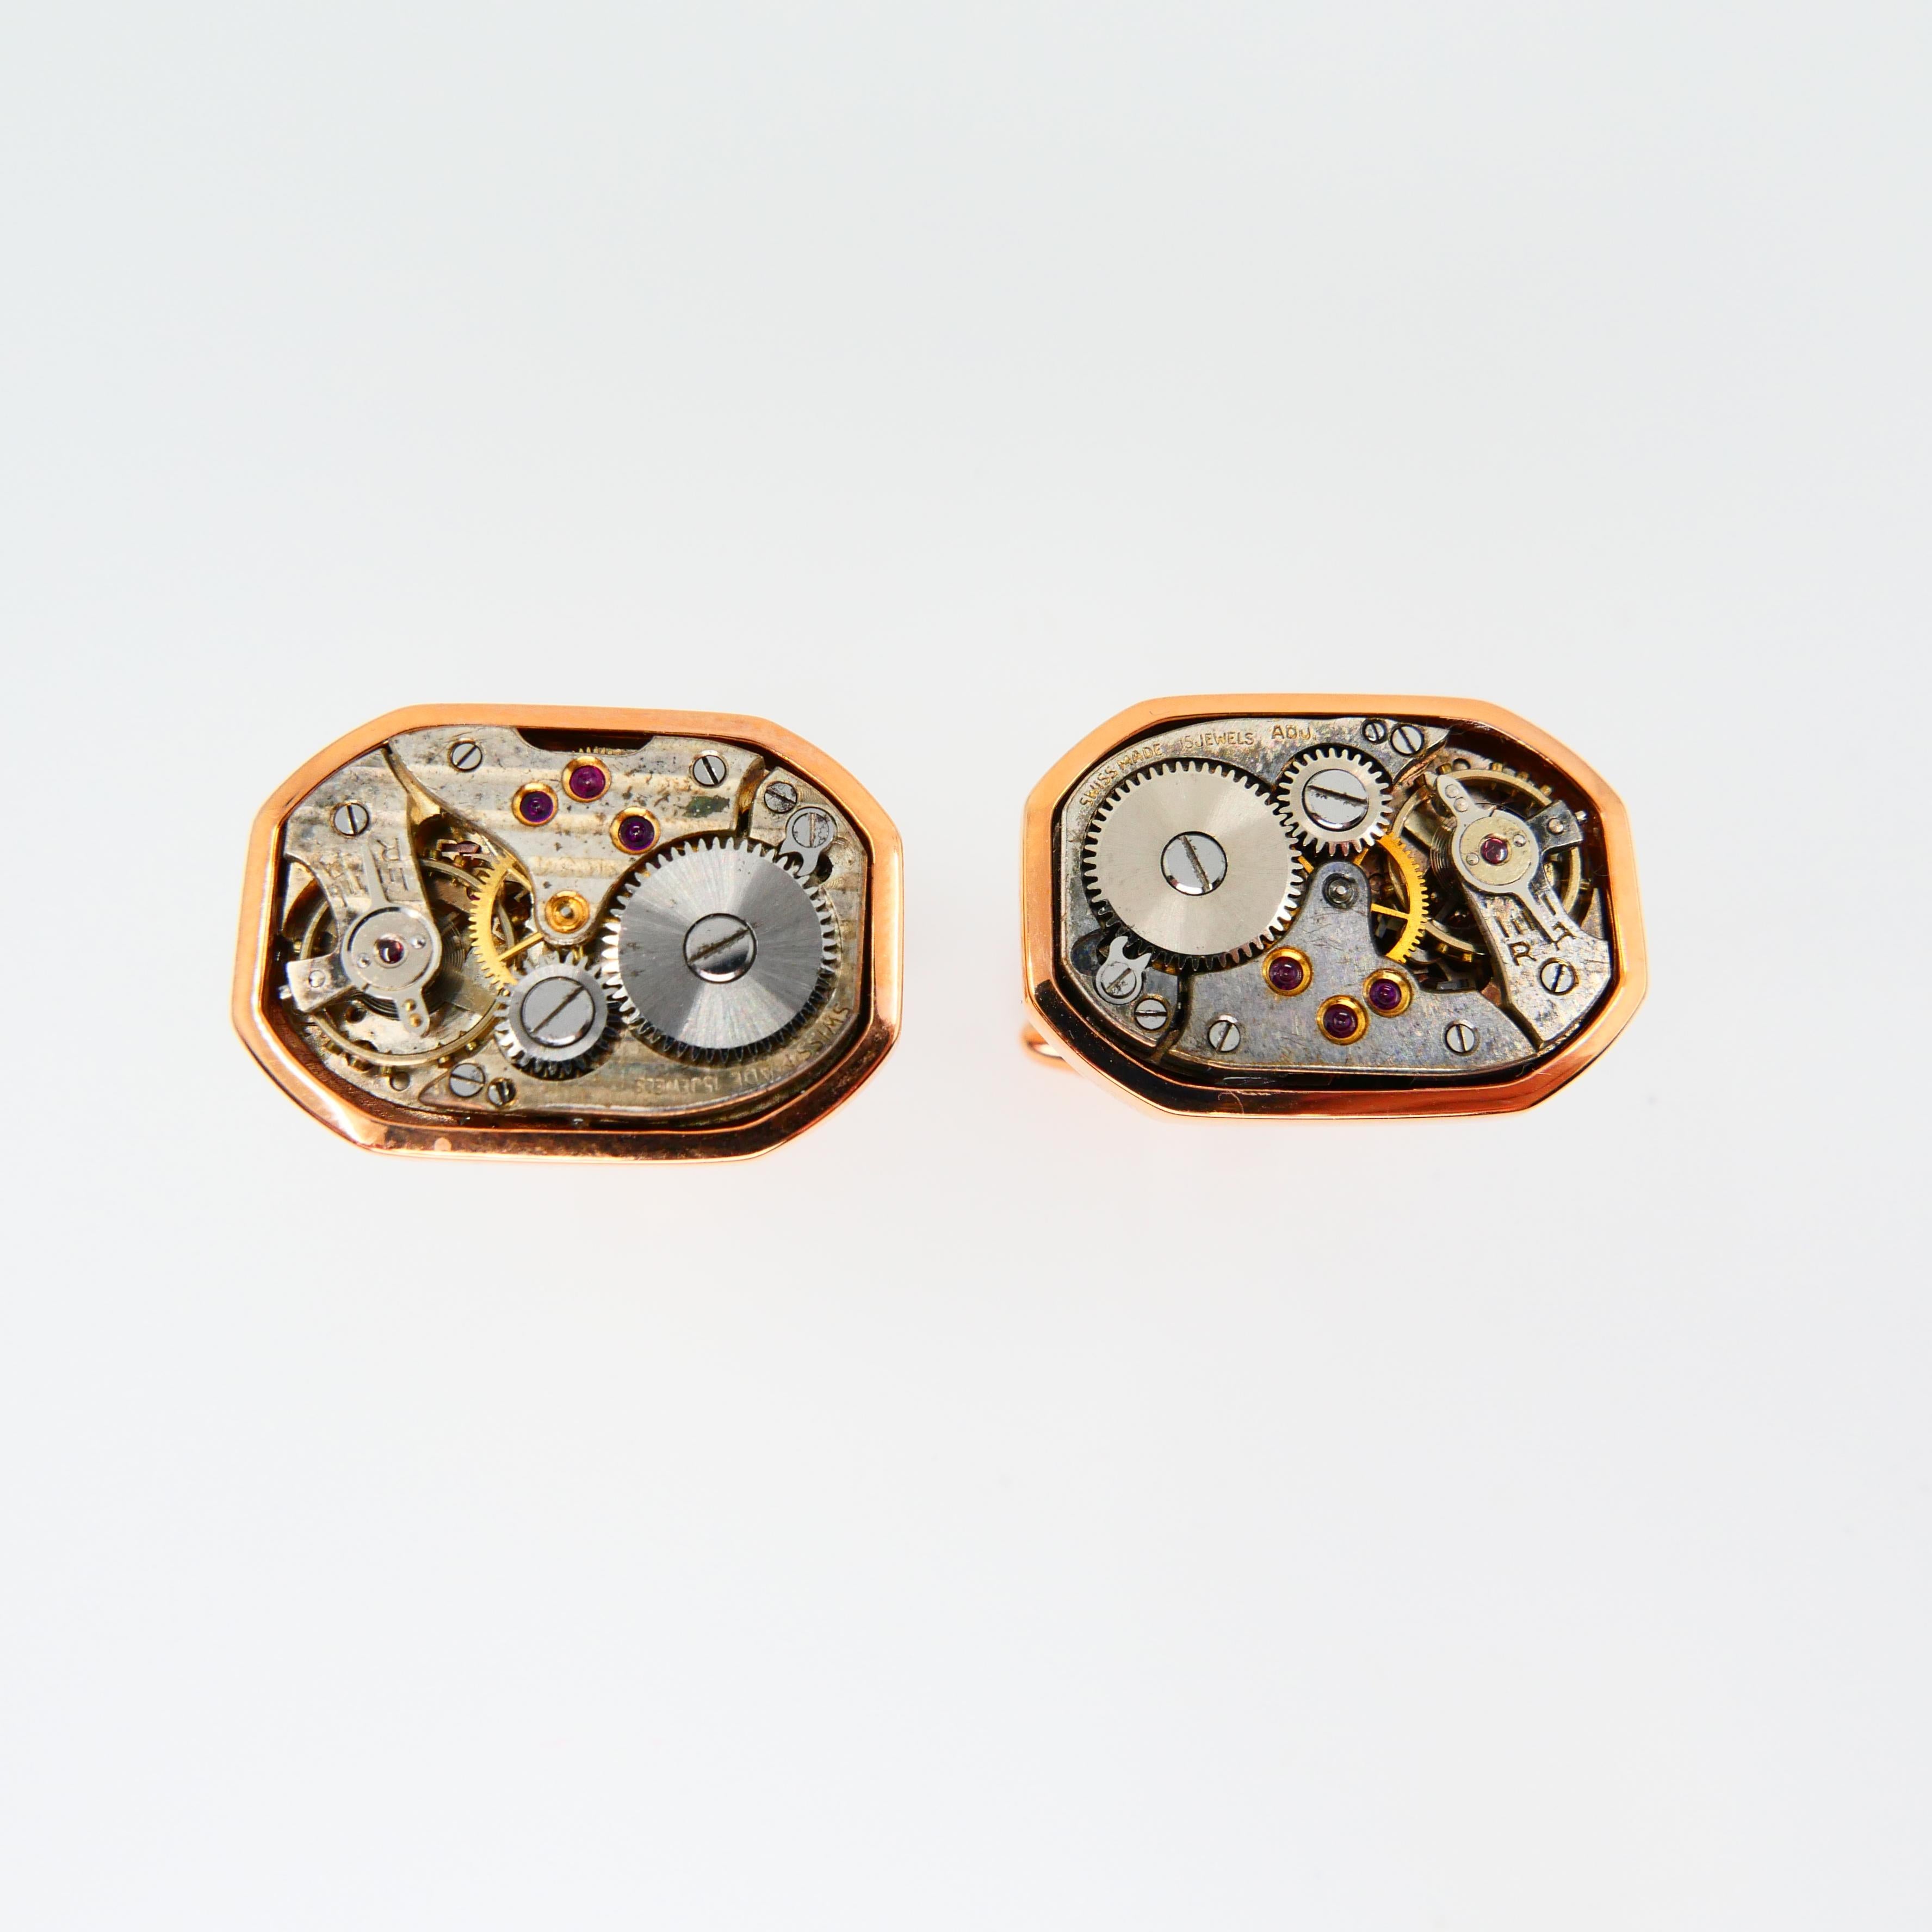 Here is something for the men. These 18k solid rose gold cufflinks are awesome! A perfect gift for the watch connoisseur or someone building their cufflink collection. These are made of solid 18k gold. The total weight is 17.24 grams including the